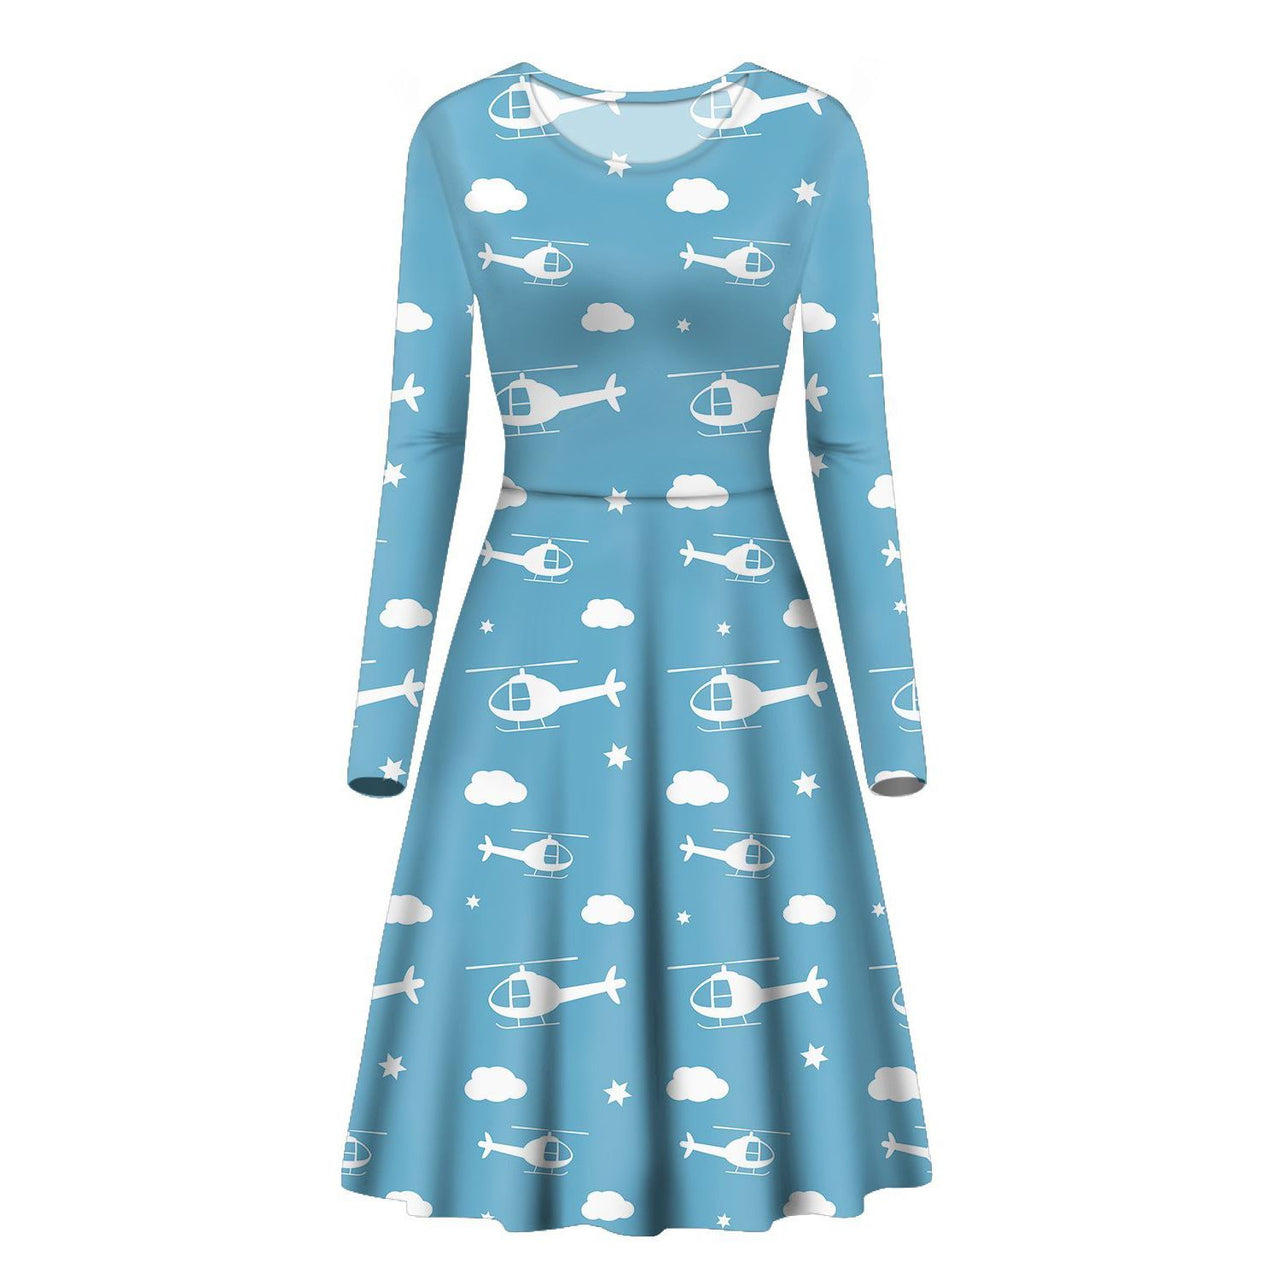 Helicopters & Clouds Designed Long Sleeve Women Midi Dress